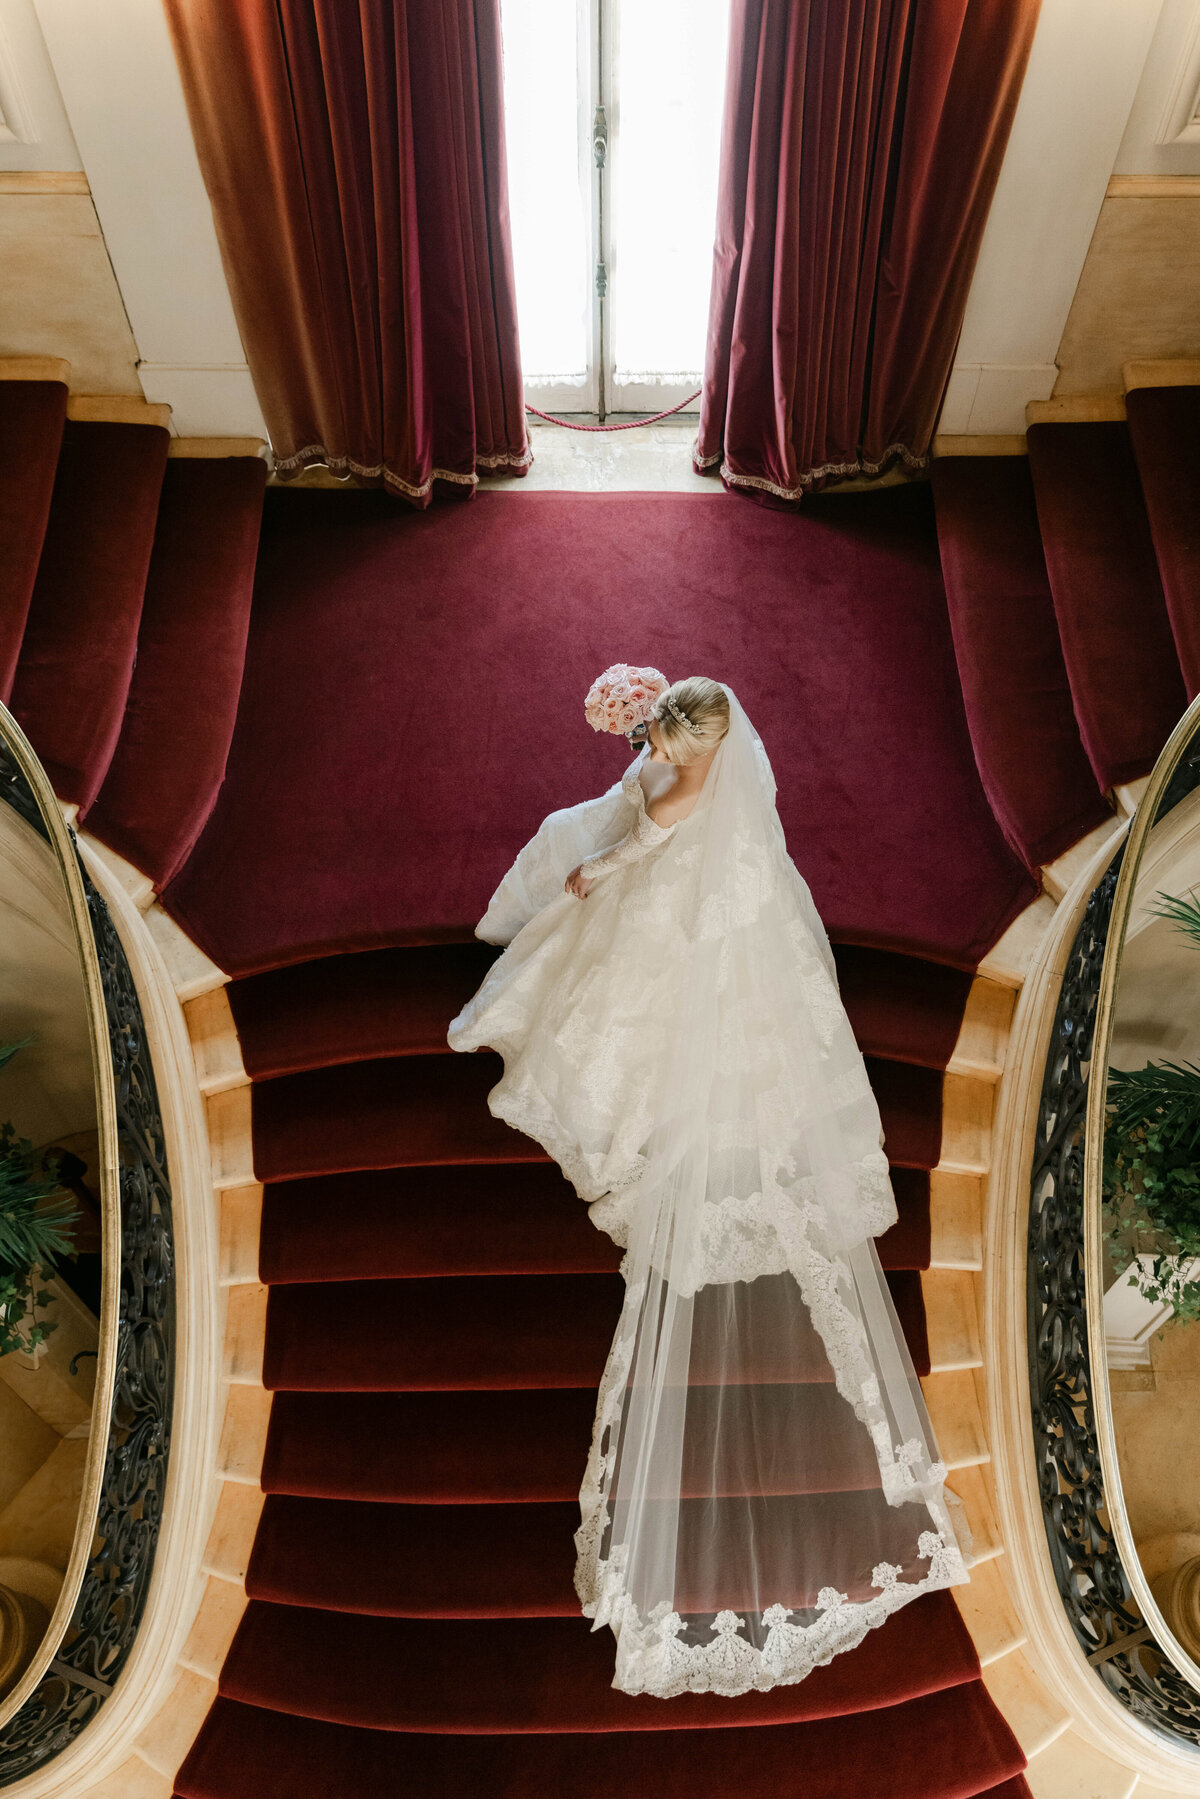 Rosecliff-Mansion-Weddingphotography01038 copy (1)